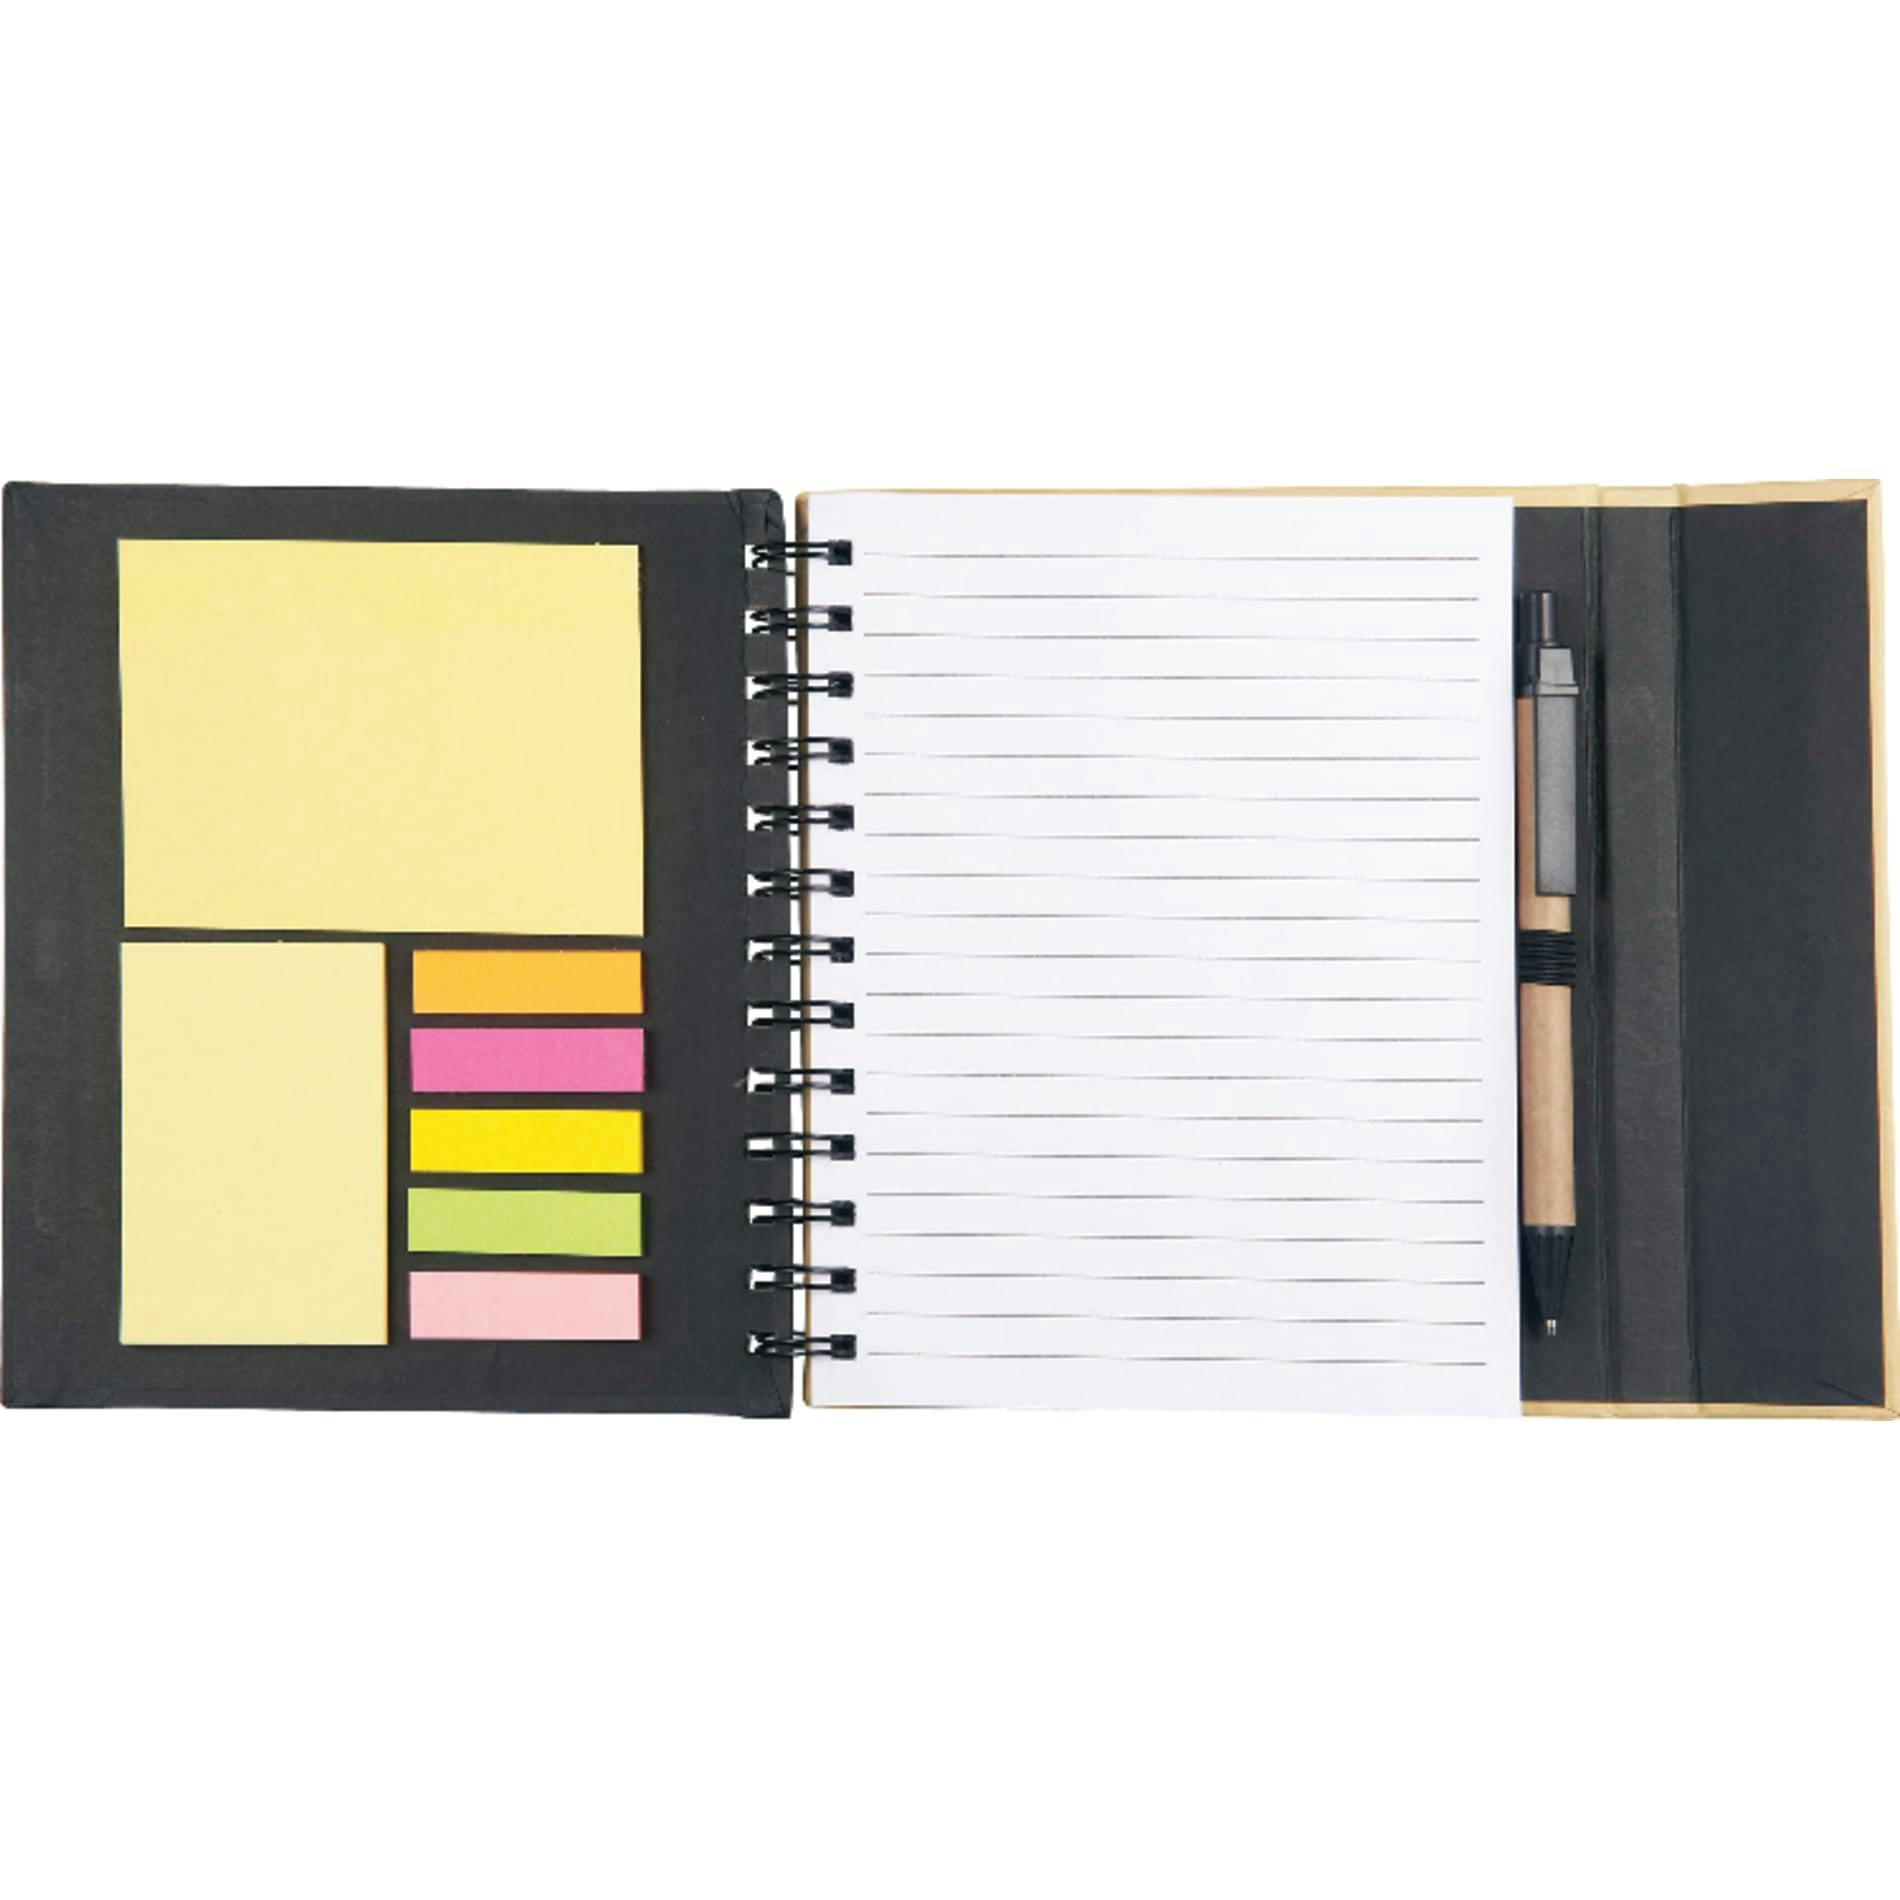 6.5" x 7" Lock-it Spiral Notebook w/Pen - additional Image 1